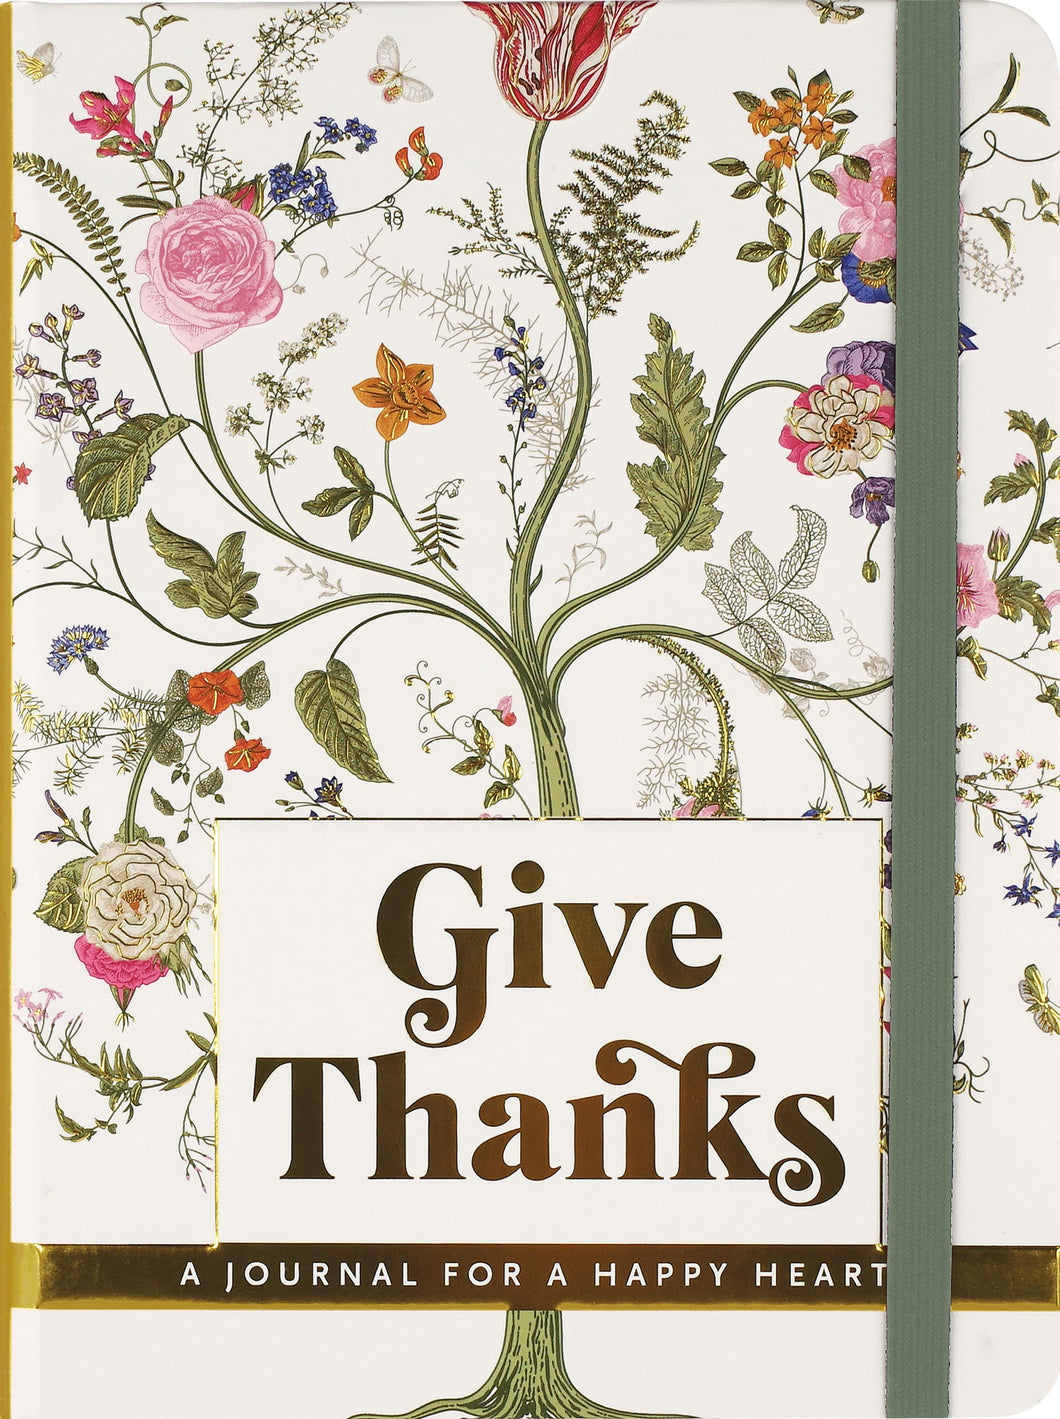 GIVE THANKS: JOURNAL FOR A HAPPY HEART